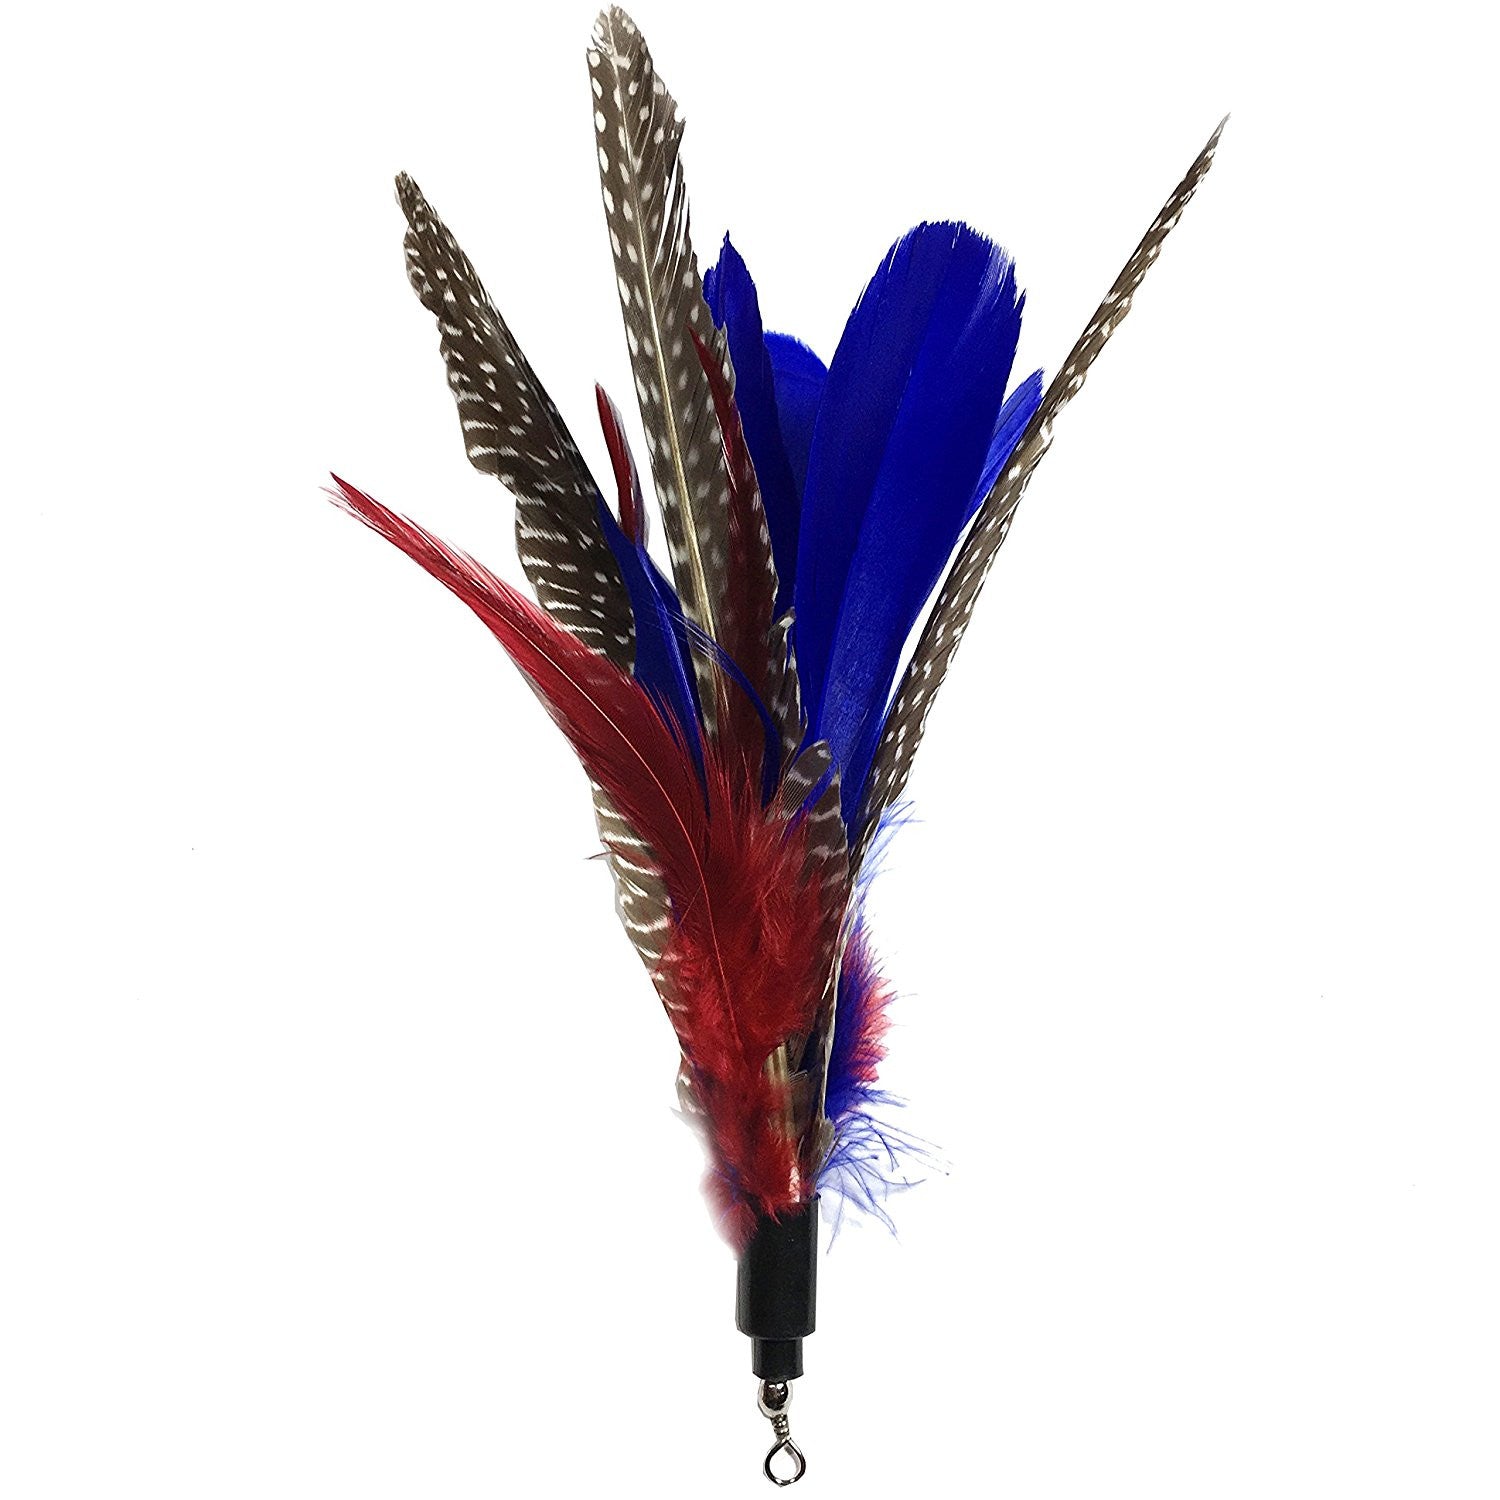 Pet Fit for Life 7 Piece - Plus Bonus - Replacement Feathers and Soft Furry for Interactive Cat and Kitten Toy Wands